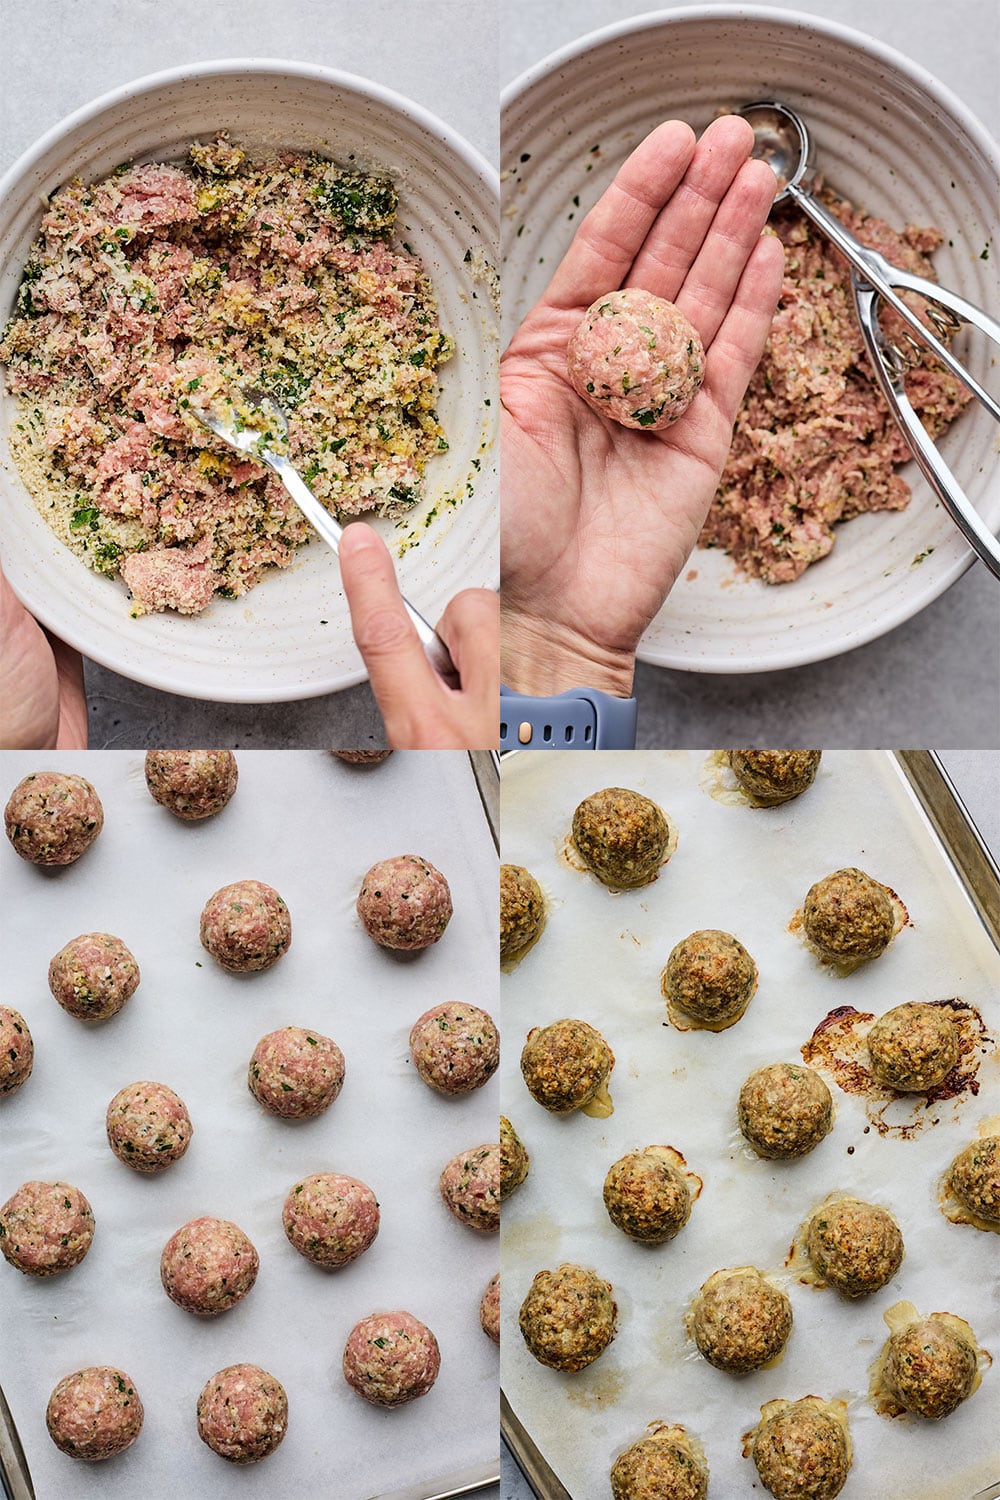 How to make Turkey Meatballs step by step